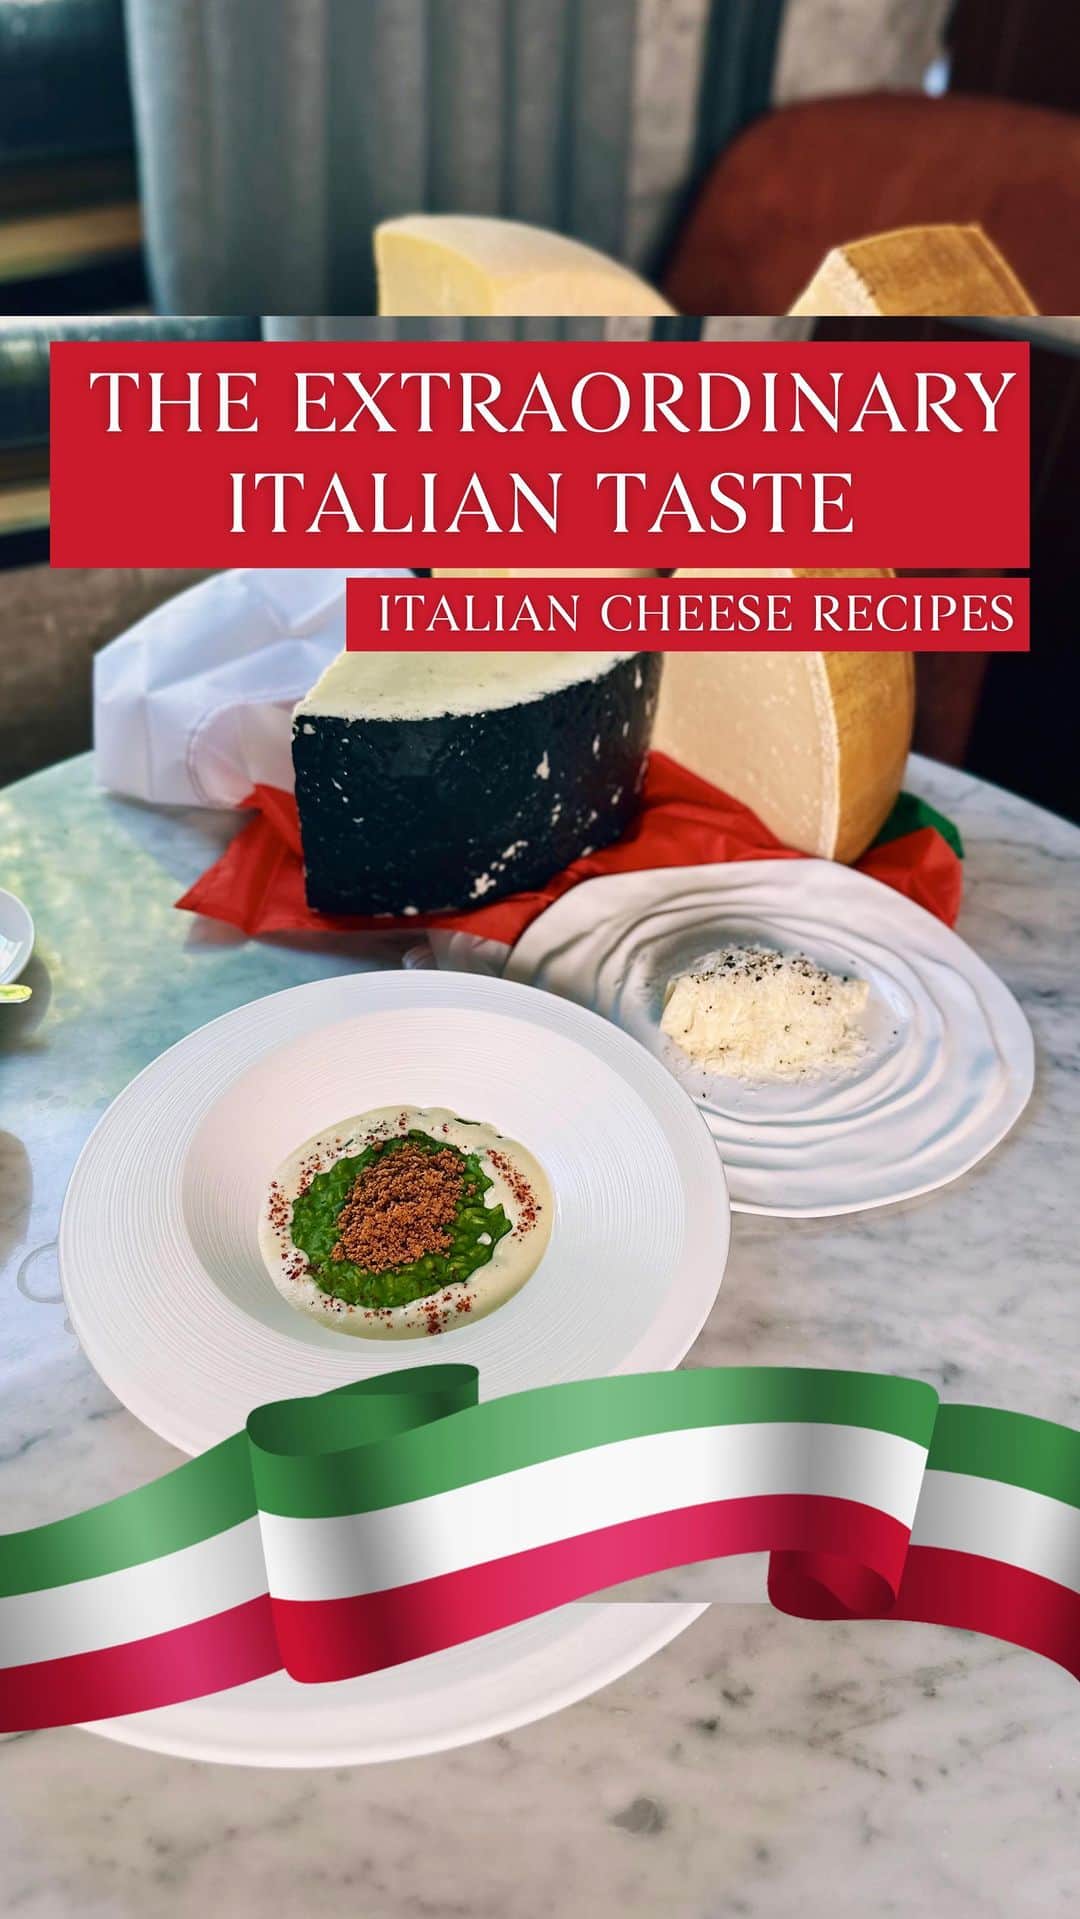 @LONDON | TAG #THISISLONDONのインスタグラム：「ad 🇮🇹 Ciao guys! 🙌🏼 To celebrate #Italian cheese in the UK, for all you #foodies, @ITALondon_ has some delicious news! 🧀 Click the LINK IN BIO to discover the #ExtraordinaryItalianTaste, along with the video recipes for this Creamy Gorgonzola & Parsley Risotto PLUS a Taleggio Tortelloni! 🇮🇹😋 More cheese video recipes are waiting for you online! It’s all free! 🥰 Enjoy!🍝💘🇮🇹  #Assolatte #ITA #ItalianTradeAgency #MadeInItaly @GranaPadano @ParmigianoReggiano @Mozzarella_dop @Taleggiodop @PecorinoRomanodop @formaggioasiagodop @provolonevalpadana @gorgonzoladop @pecorinotoscano  ___________________________________________ #thisislondon #lovelondon #london #londra #londonlife #londres #uk #visitlondon #british #🇬🇧 #foodiesoflondon #londonfoodies #londonfoodie #londonfood #londonrestaurants #londonbars #londonreviewed #italianfood #pastalover #italiancheese #cheeselover」